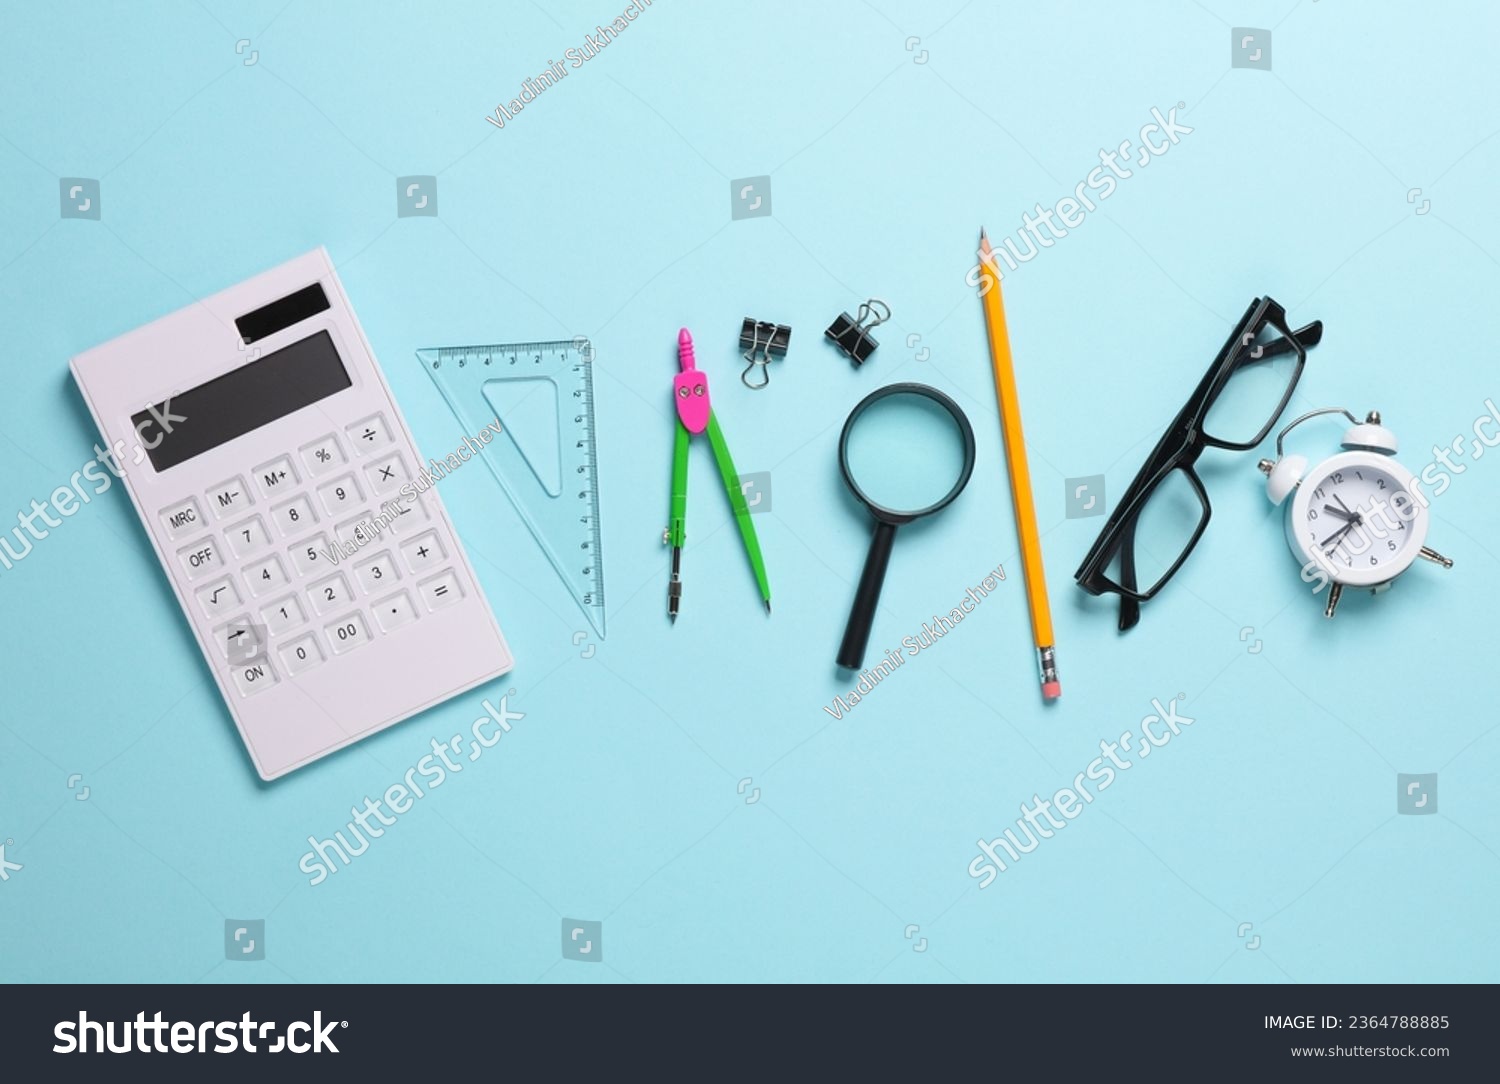 Set of school supplies on a blue background. Top idl #2364788885